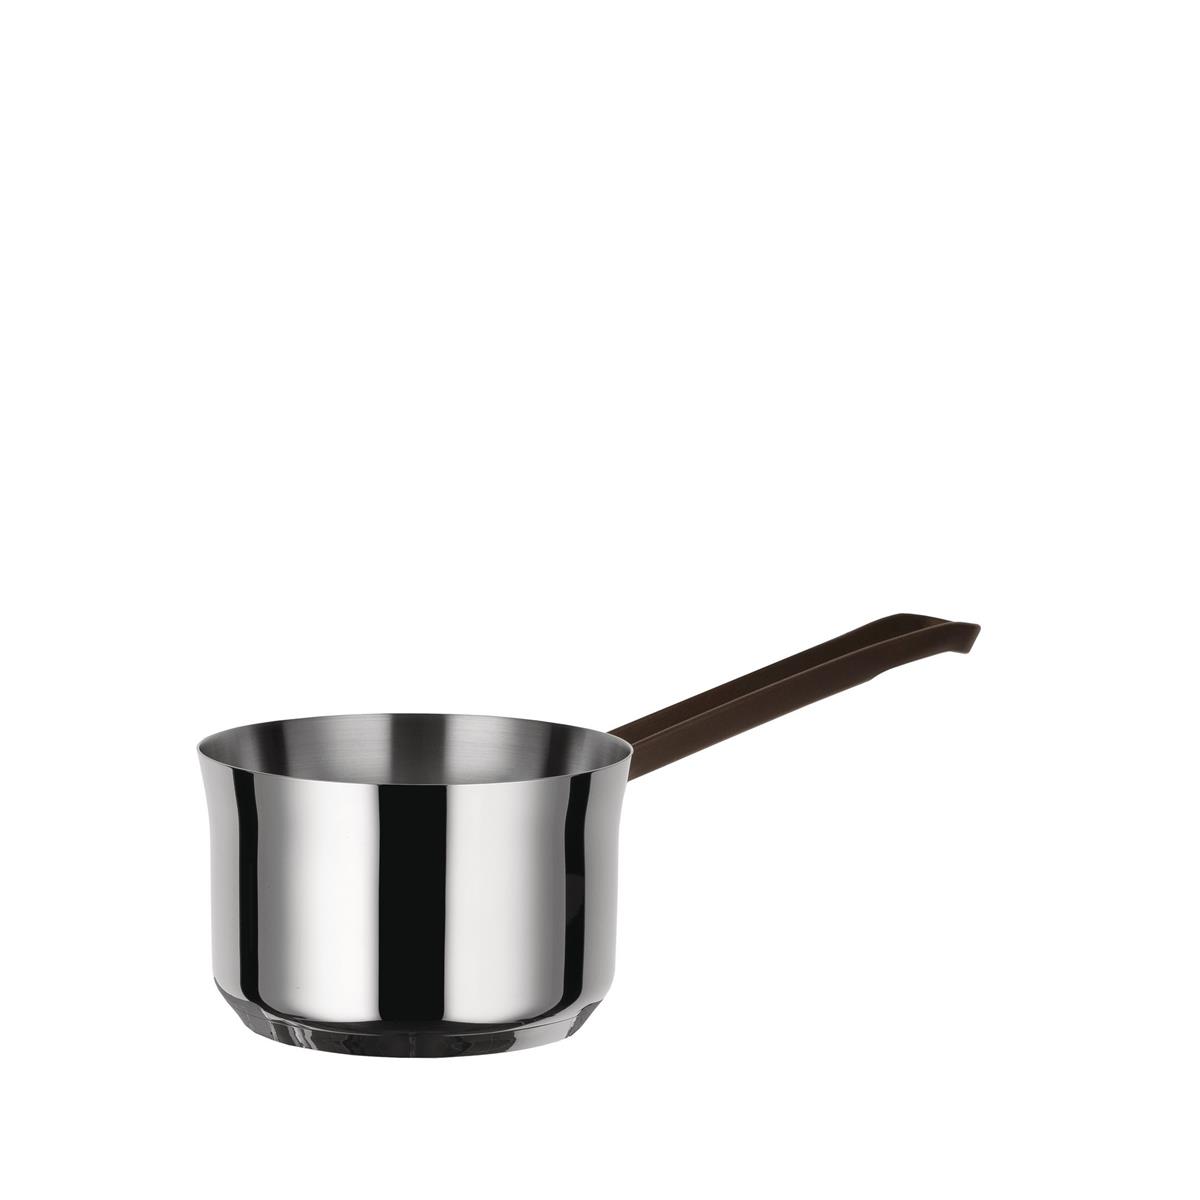 photo edo long-handled saucepan in 18/10 stainless steel suitable for induction